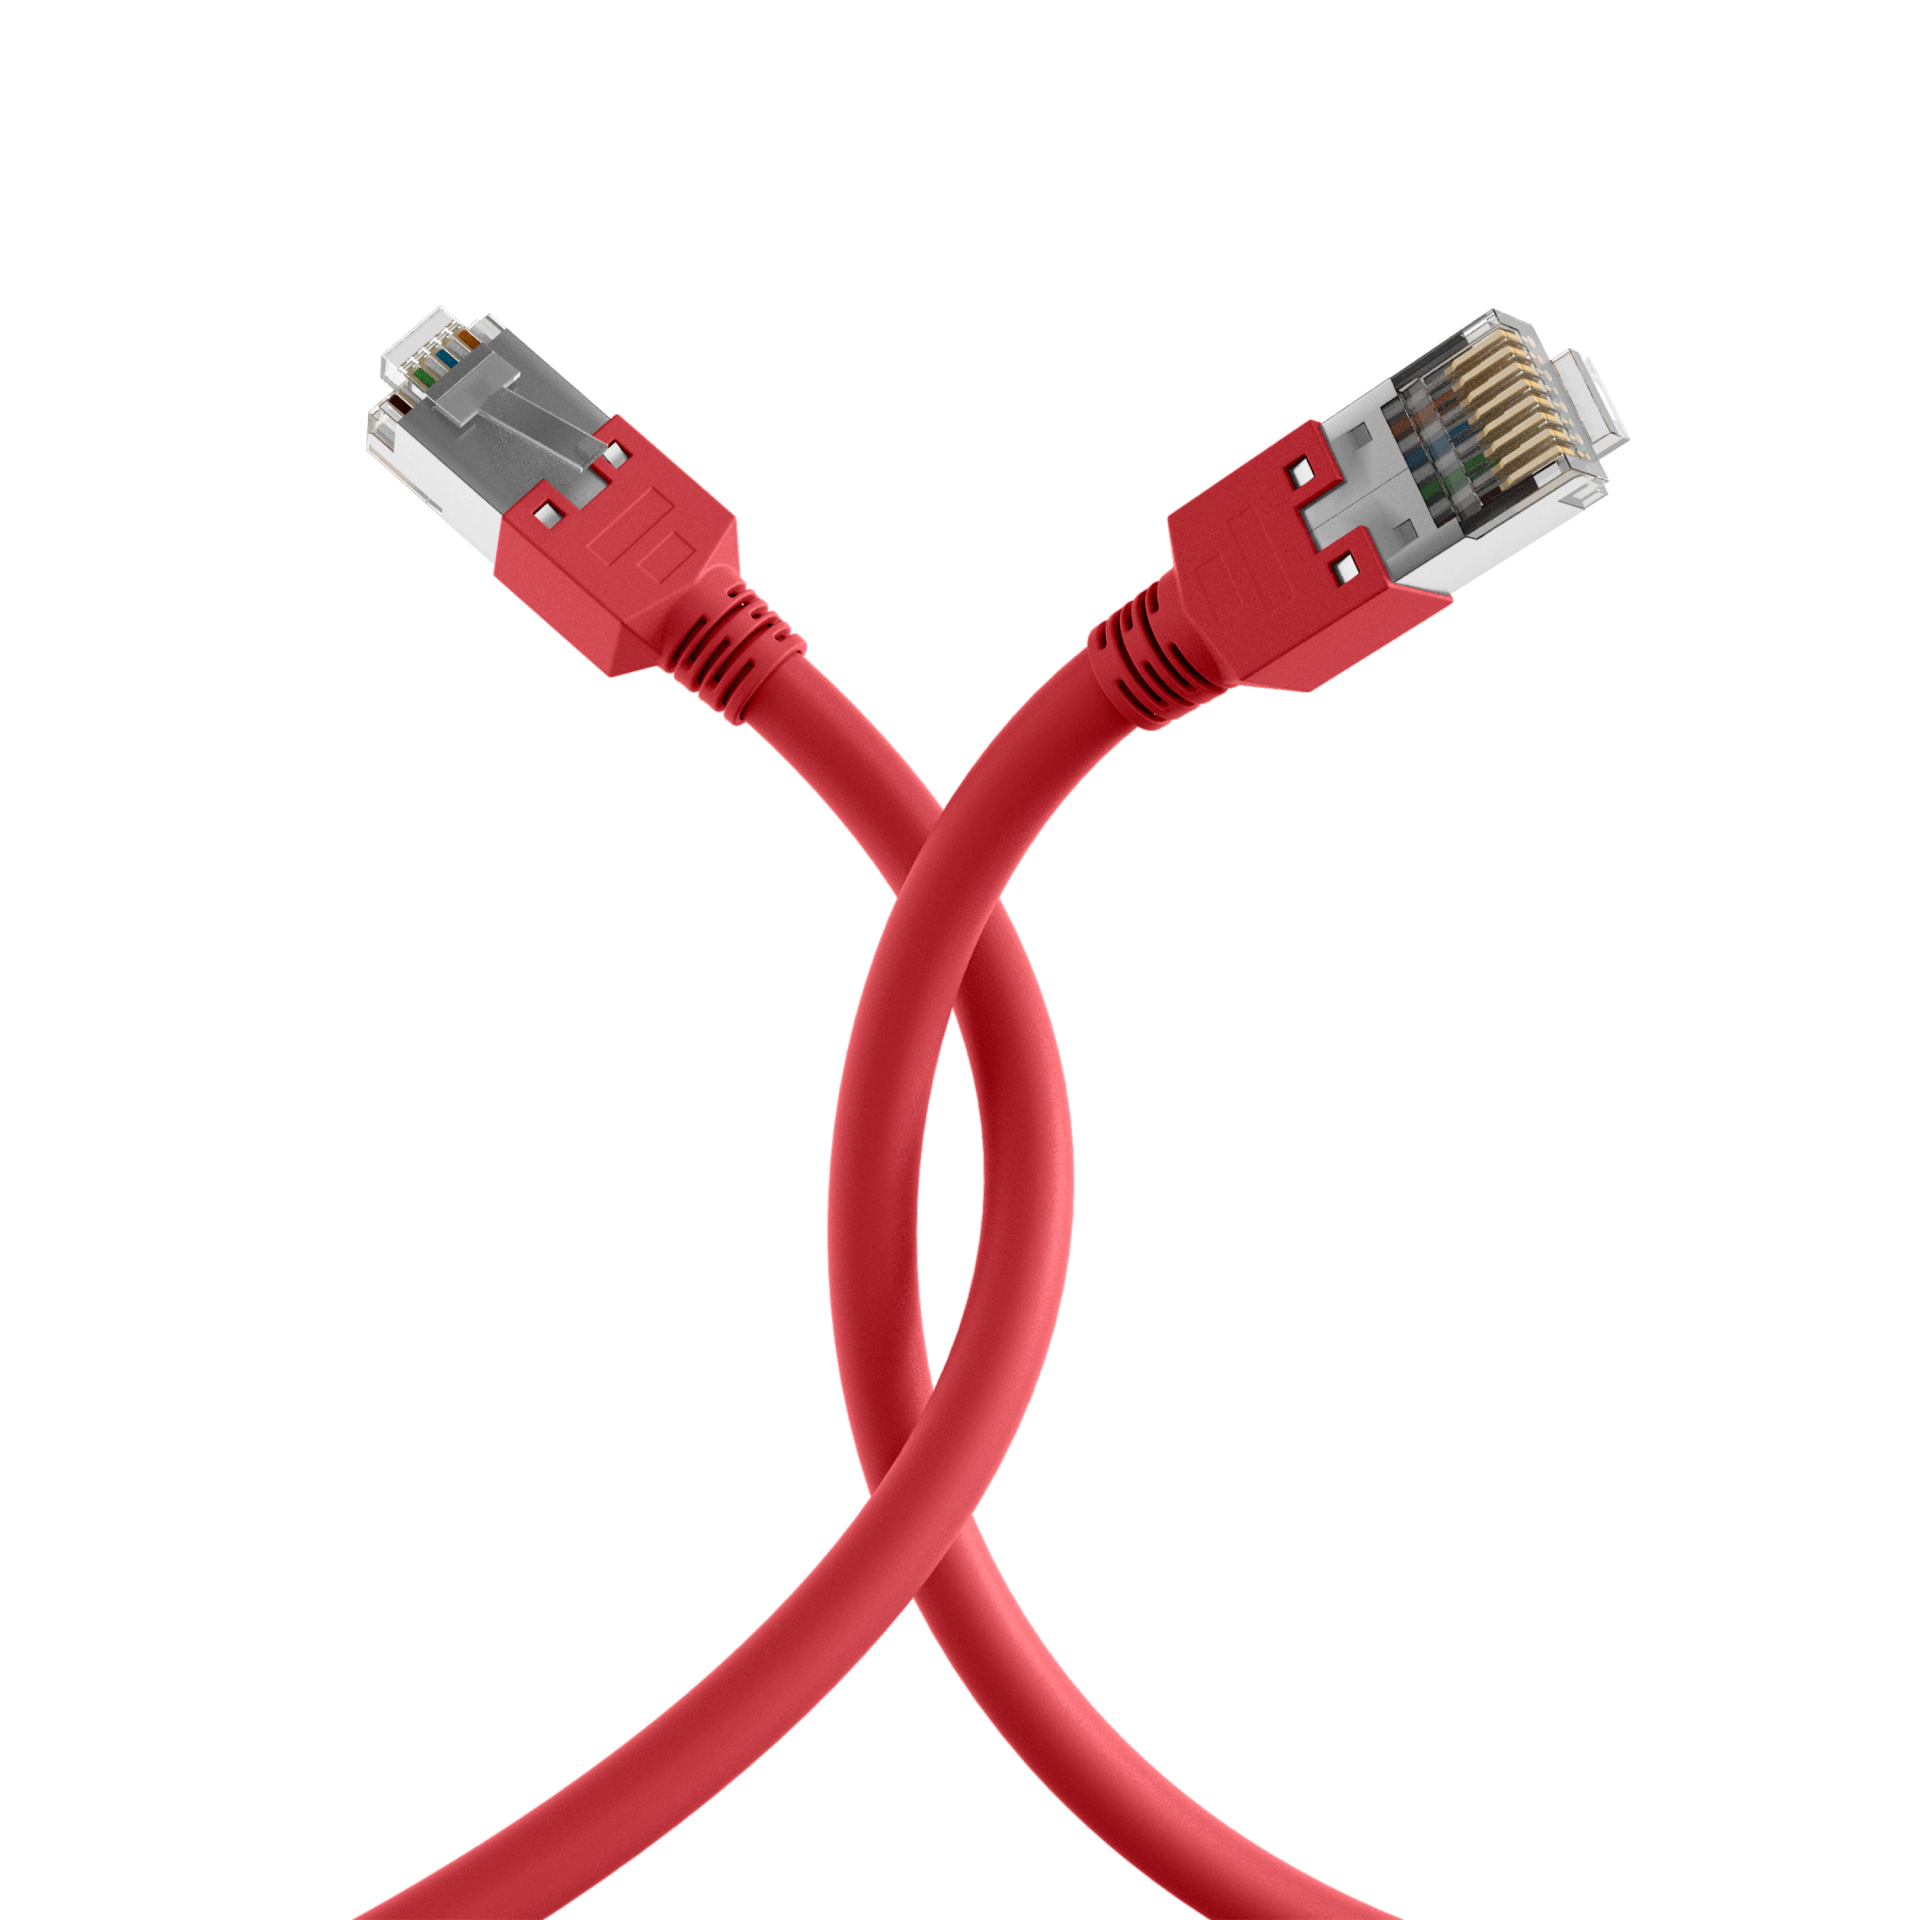 RJ45 Patch Cord Cat.5e S/UTP PVCDätwyler 5502 TM11 red 5m